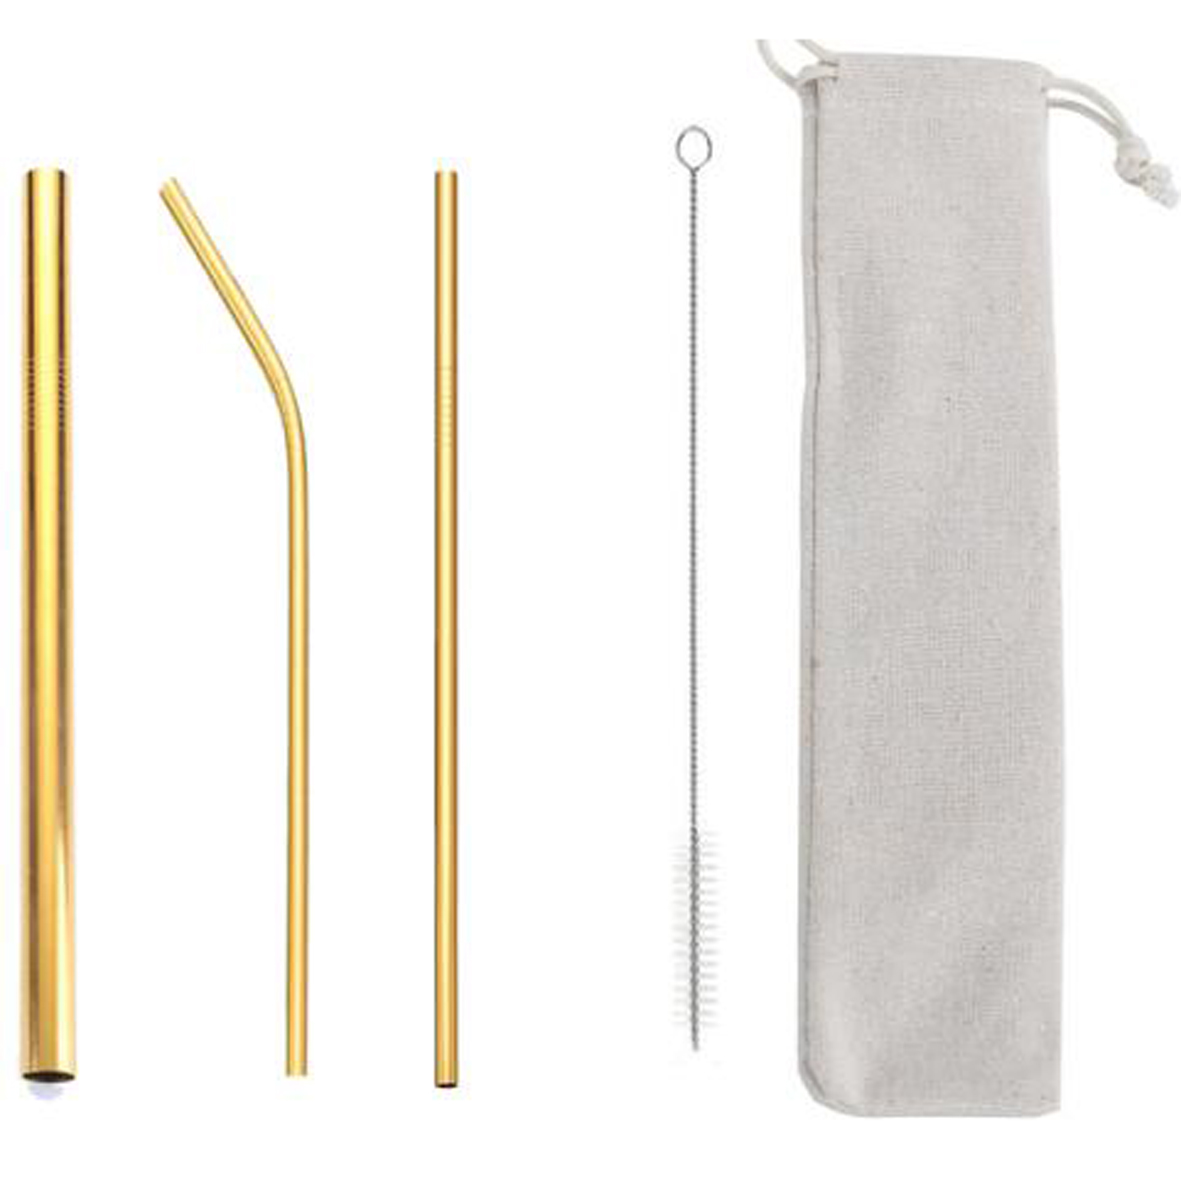 GL-ELY1260 4 in 1 Golden Metal Straw Set with Carrying Pouch